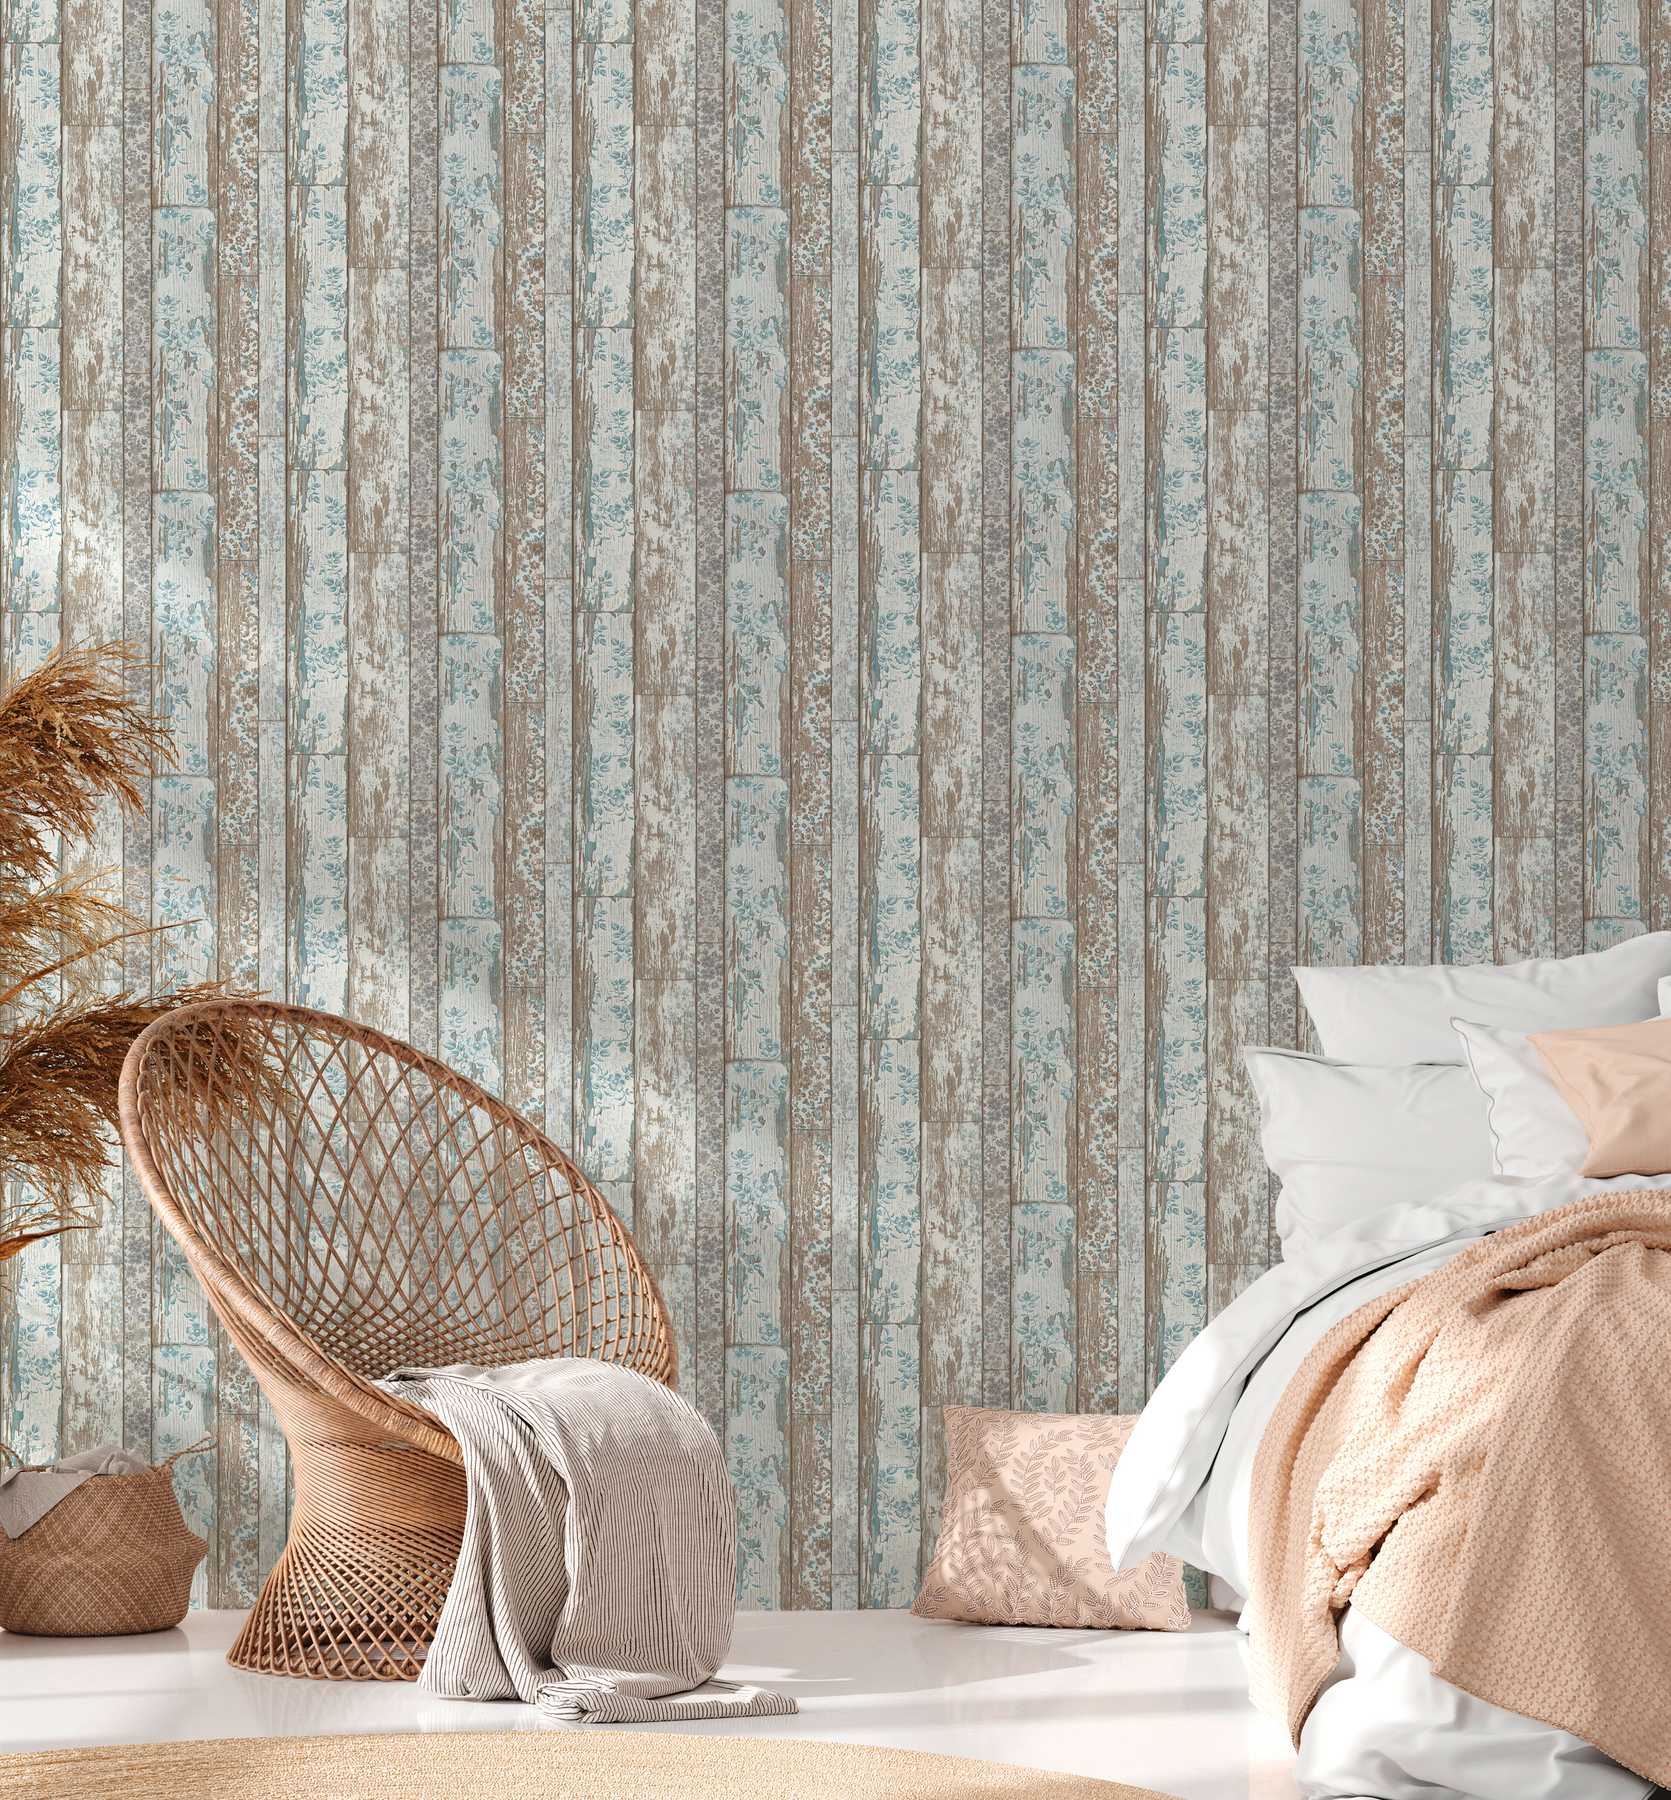             Country house wallpaper plank look with vintage floral print - blue, brown, grey
        